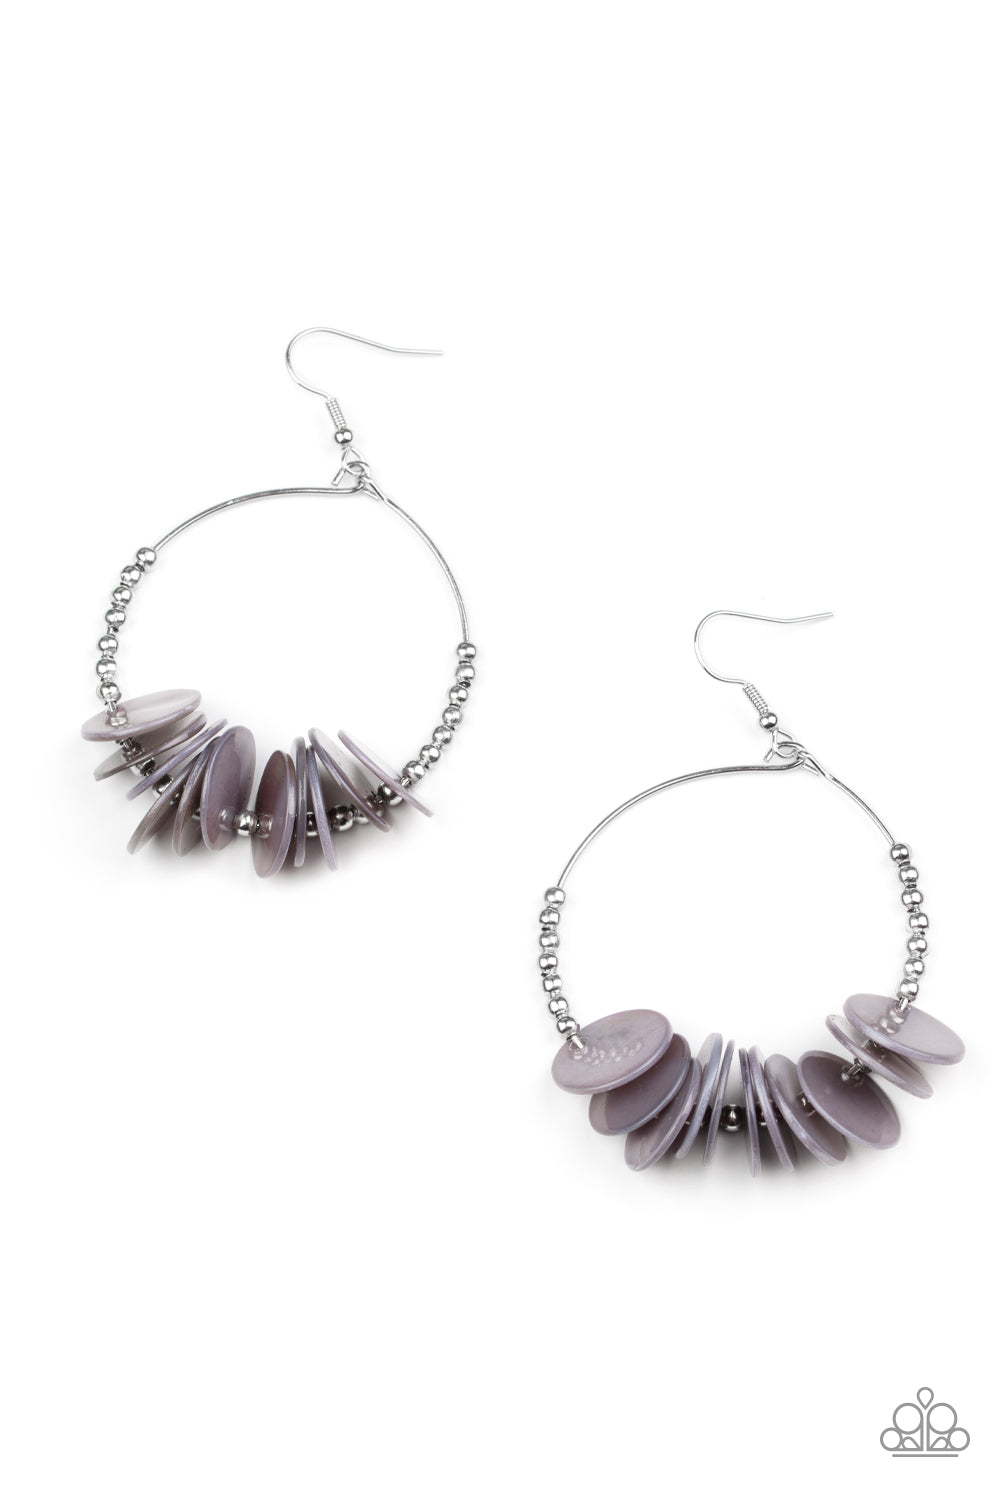 Caribbean Cocktail Silver Earring - Paparazzi Accessories  Shiny silver shell-like discs alternate with dainty silver beads around a petite circular silver wire frame for a touch of Caribbean charisma. Earring attaches to a standard fishhook fitting.  Sold as one pair of earrings.